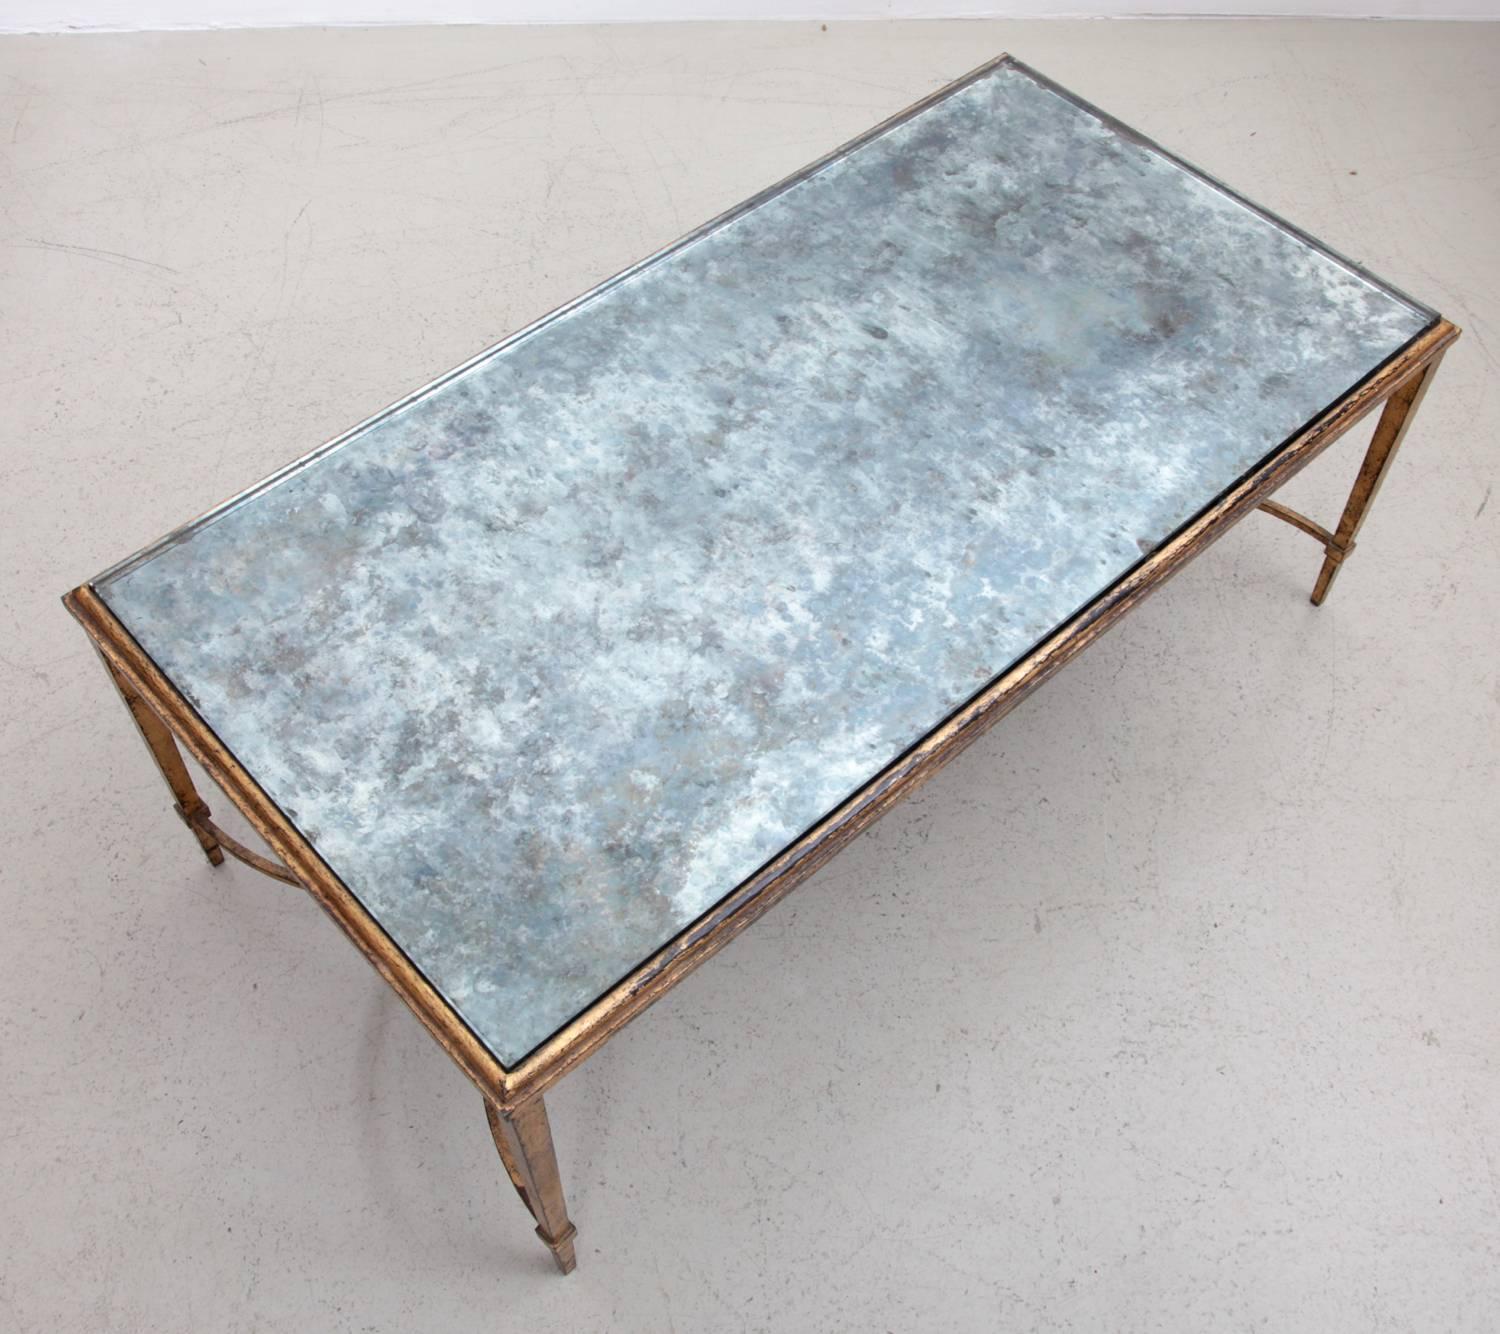 Rare excellent Maison Ramsay coffee table with silver plated glass with no chips from the early 1960s.

